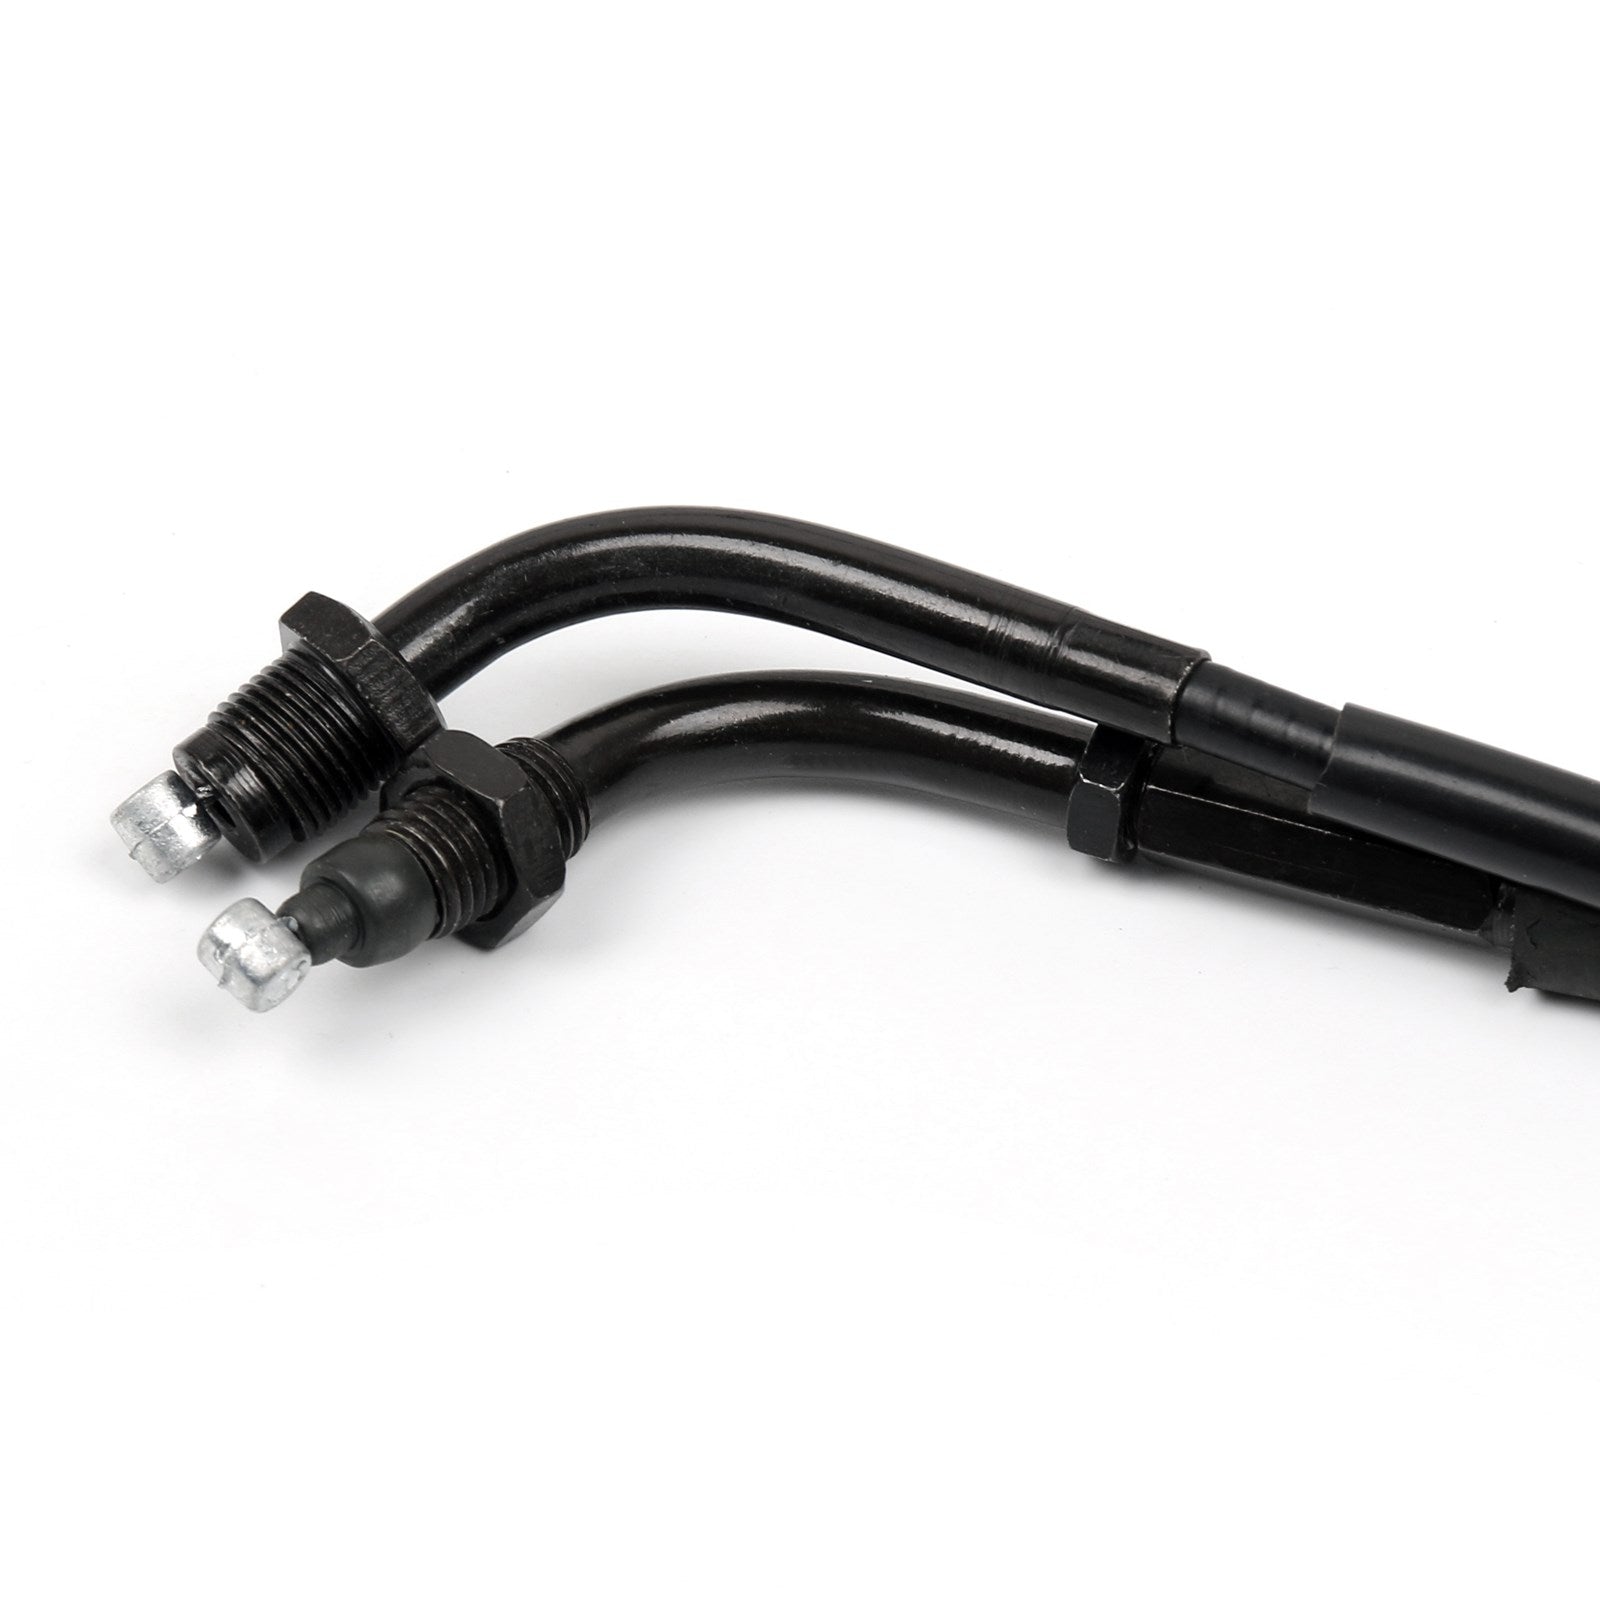 Throttle Cable For Honda NV400 Steed 1992-1997 VT600 1988-1997 Black